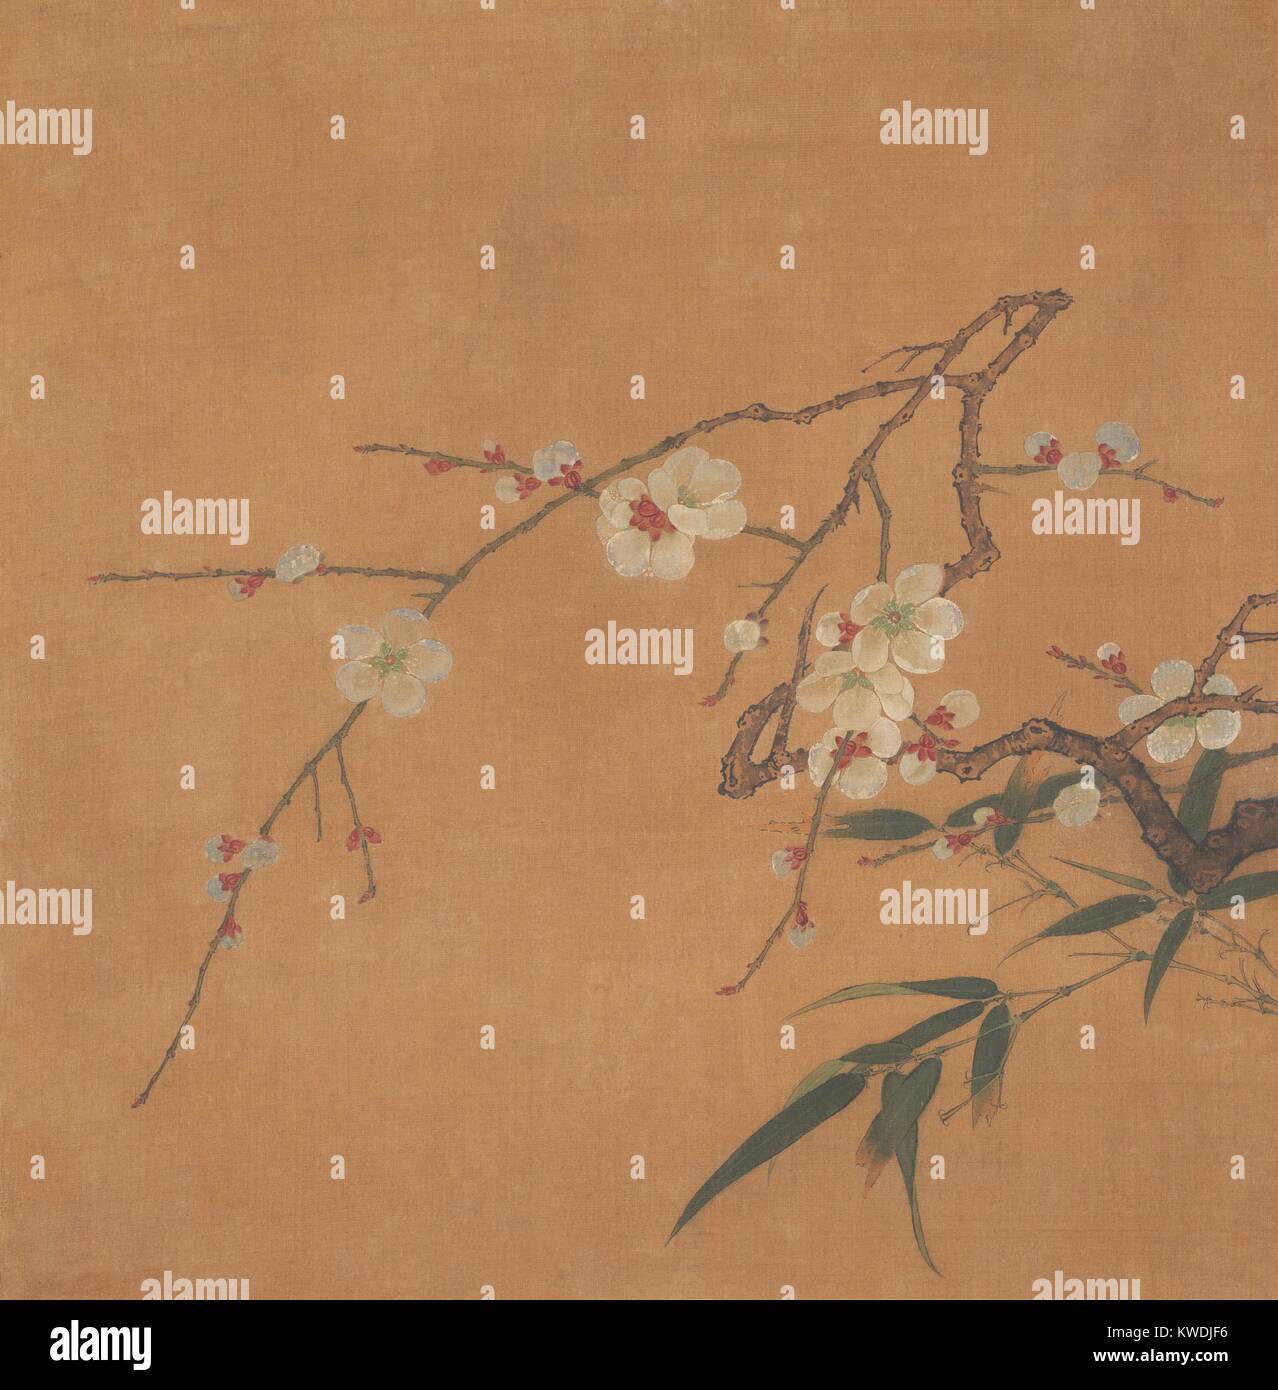 FLOWERING PLUM AND BAMBOO, Chinese, 17th c., painting, album leaf, ink, color on silk. The branches with flowers and leaves are painted in a delicate realist style. Flowers were one of the major subjects of traditional Chinese painting (BSLOC 2017 16 10) Stock Photo